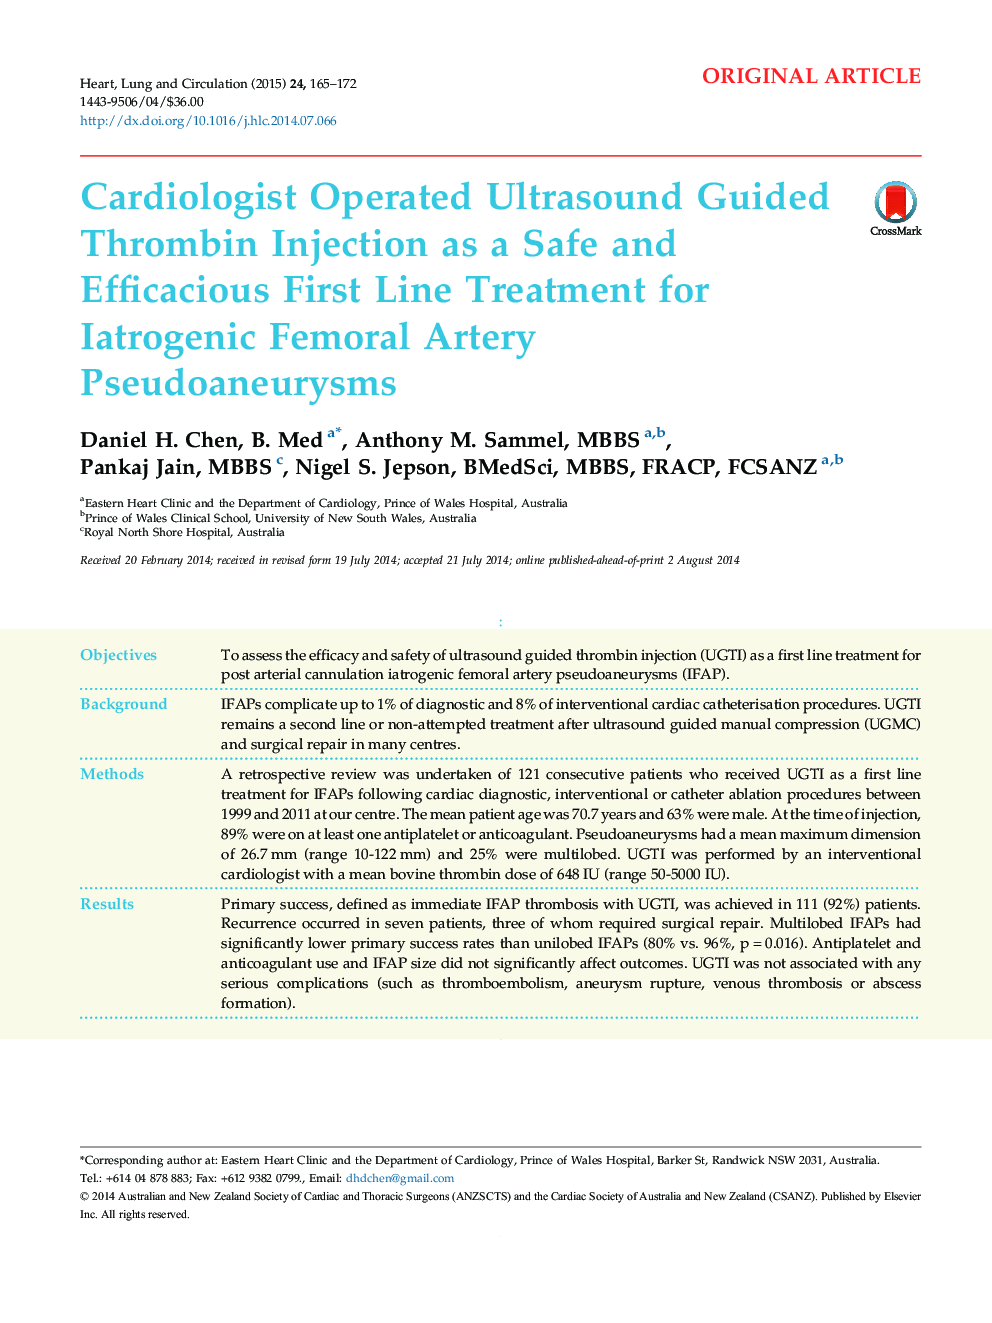 Cardiologist Operated Ultrasound Guided Thrombin Injection as a Safe and Efficacious First Line Treatment for Iatrogenic Femoral Artery Pseudoaneurysms